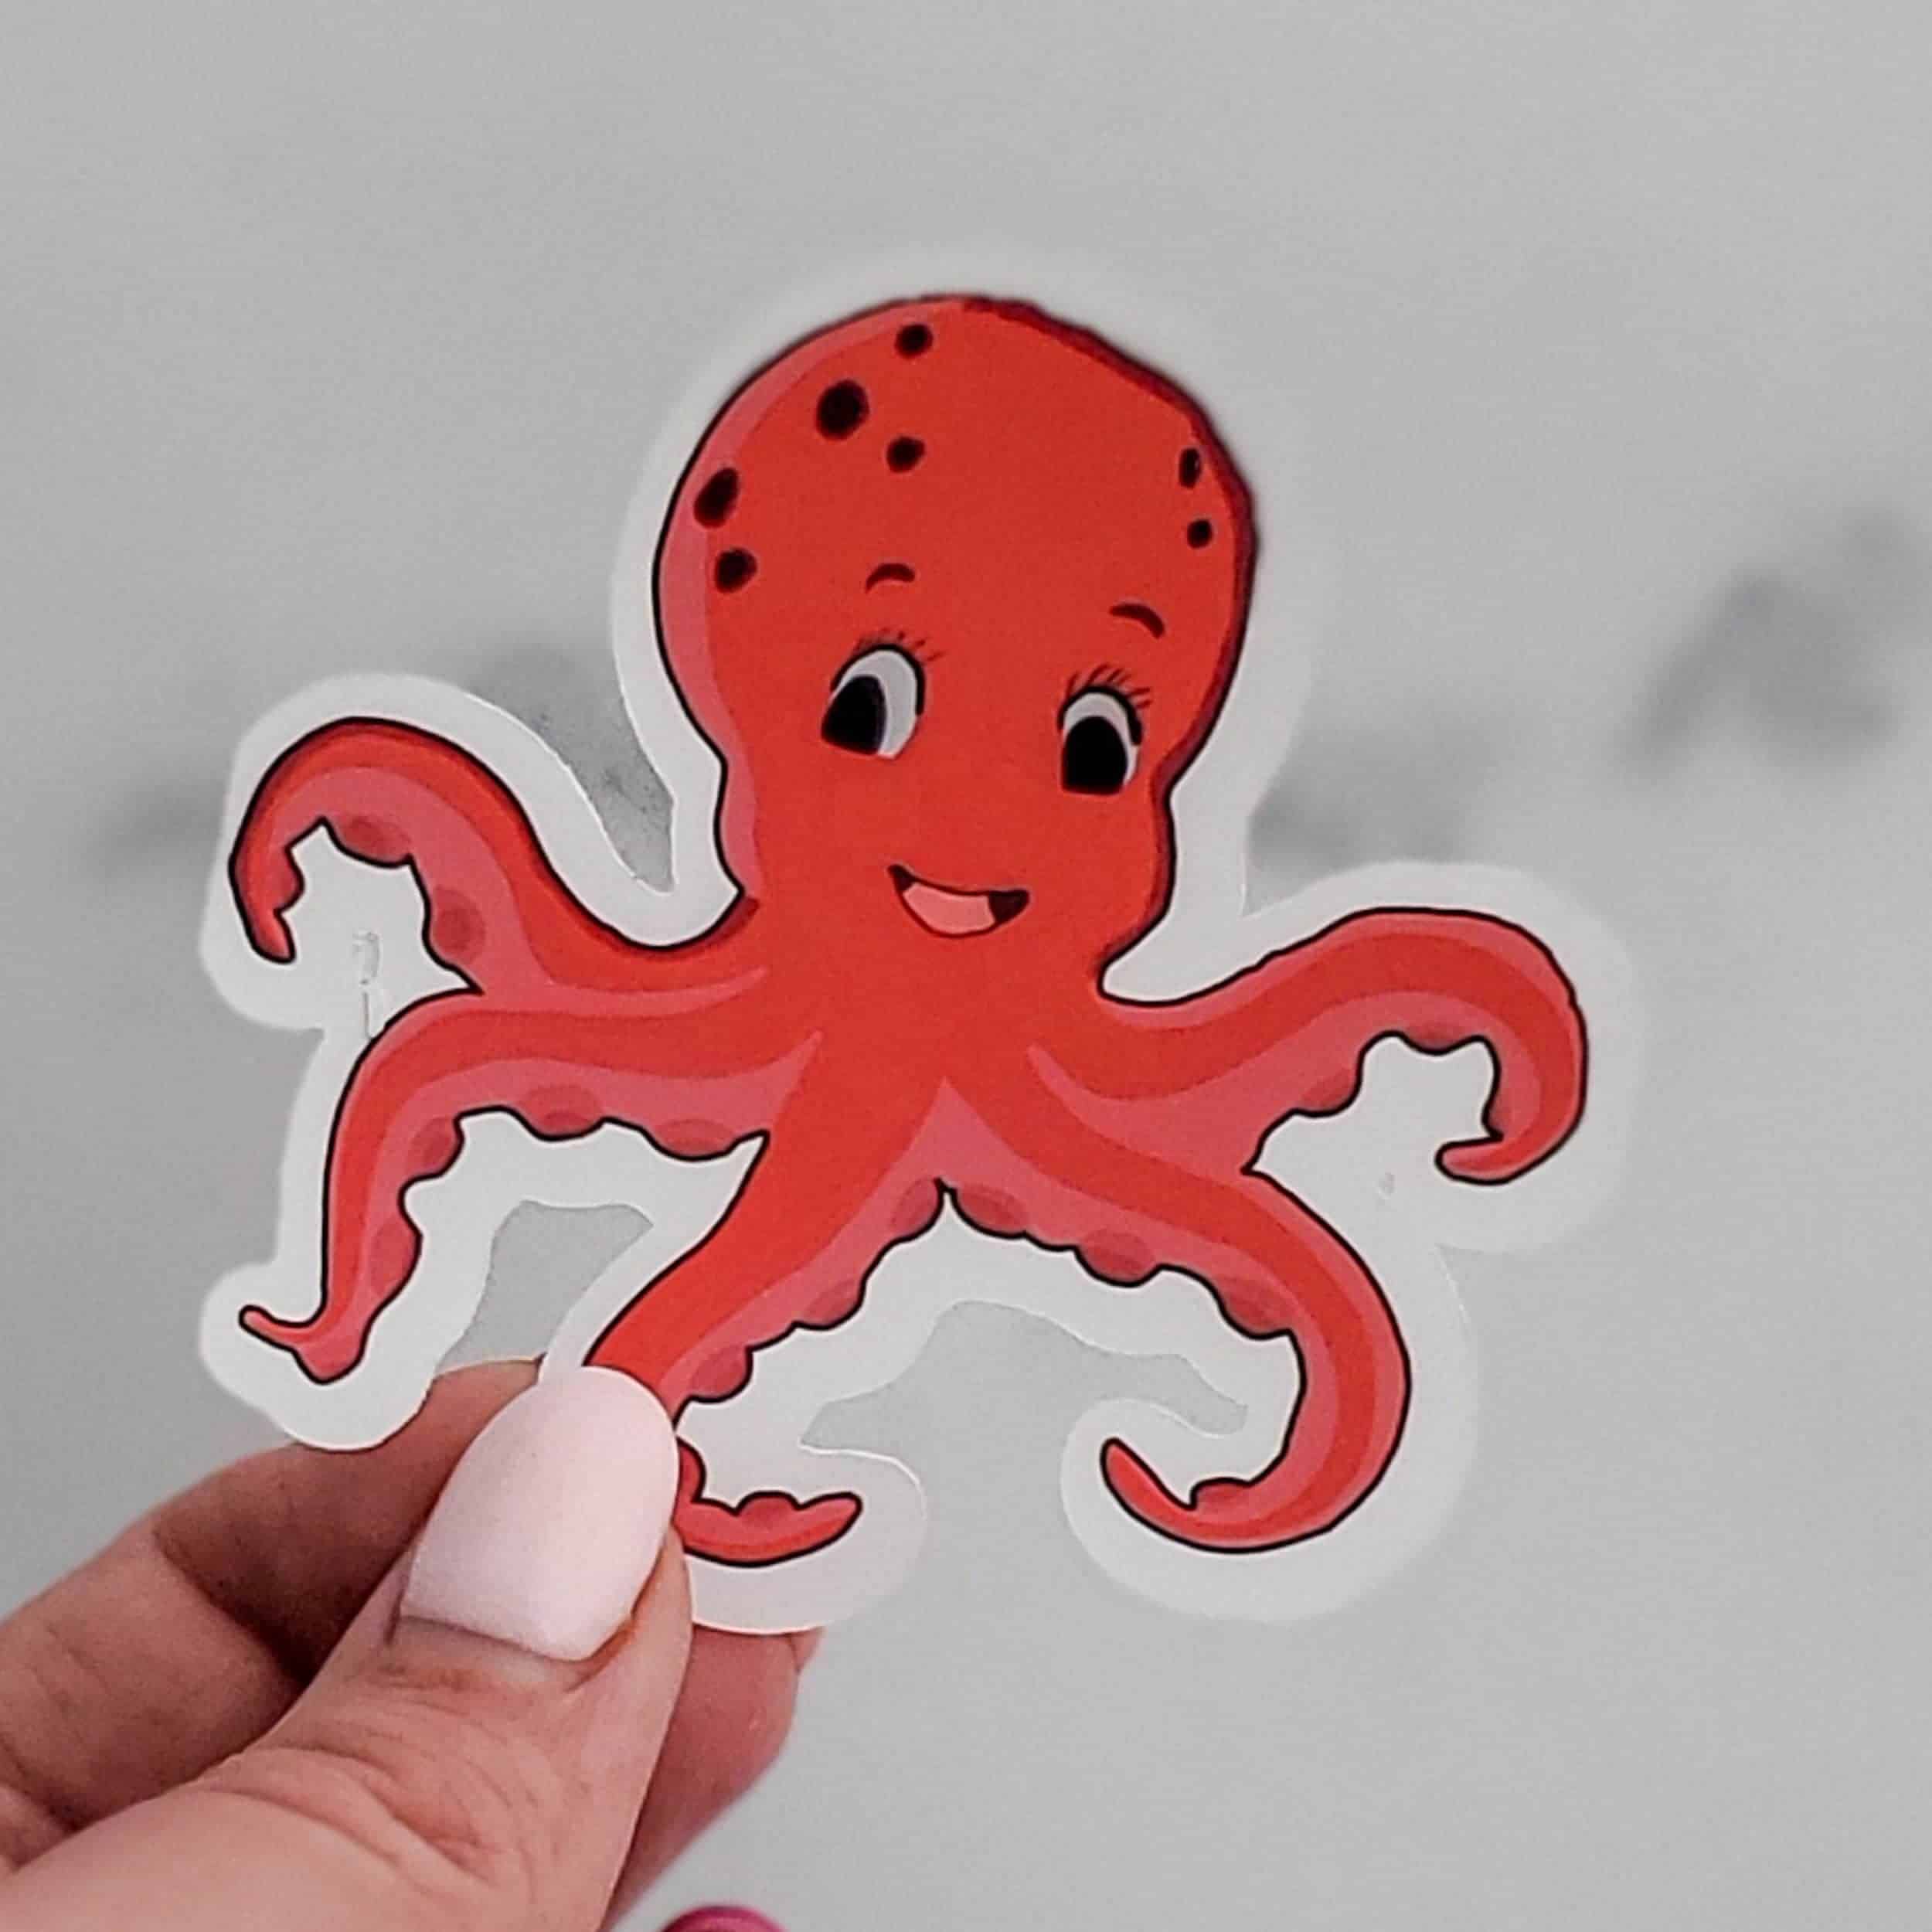 This Vinyl Octopus Sticker is made with love by CreativeImageryCo! Shop more unique gift ideas today with Spots Initiatives, the best way to support creators.